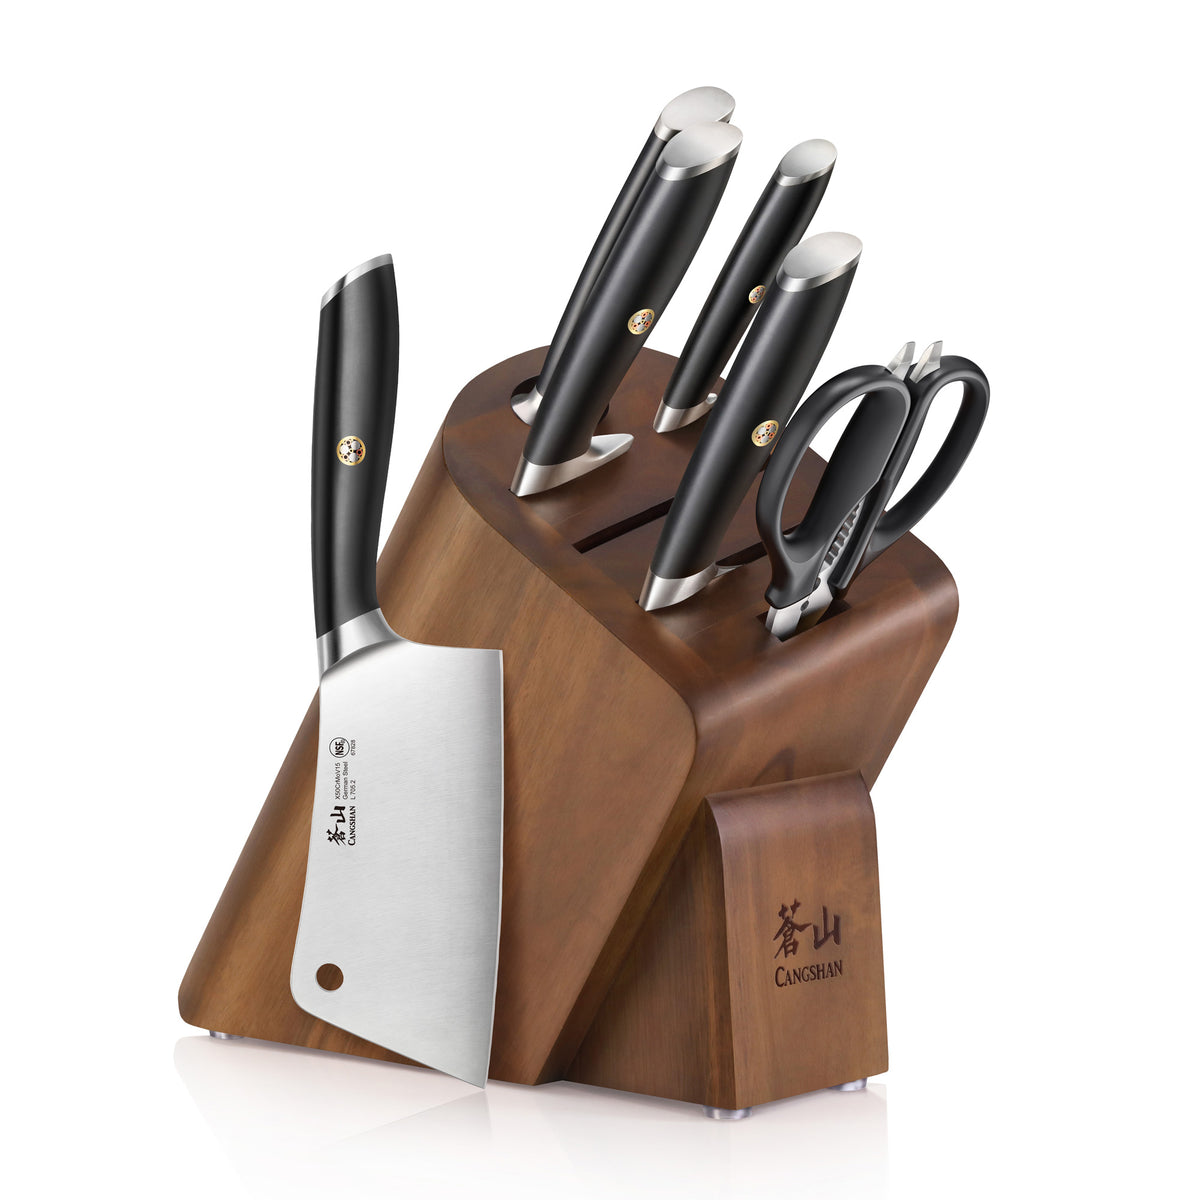 Kitchen Knife Set, Hanmaster 7 Pieces German Steel Knives Set for Kitchen  with Acacia Wood Block, Kitchen Scissors, Gift Box Packed.